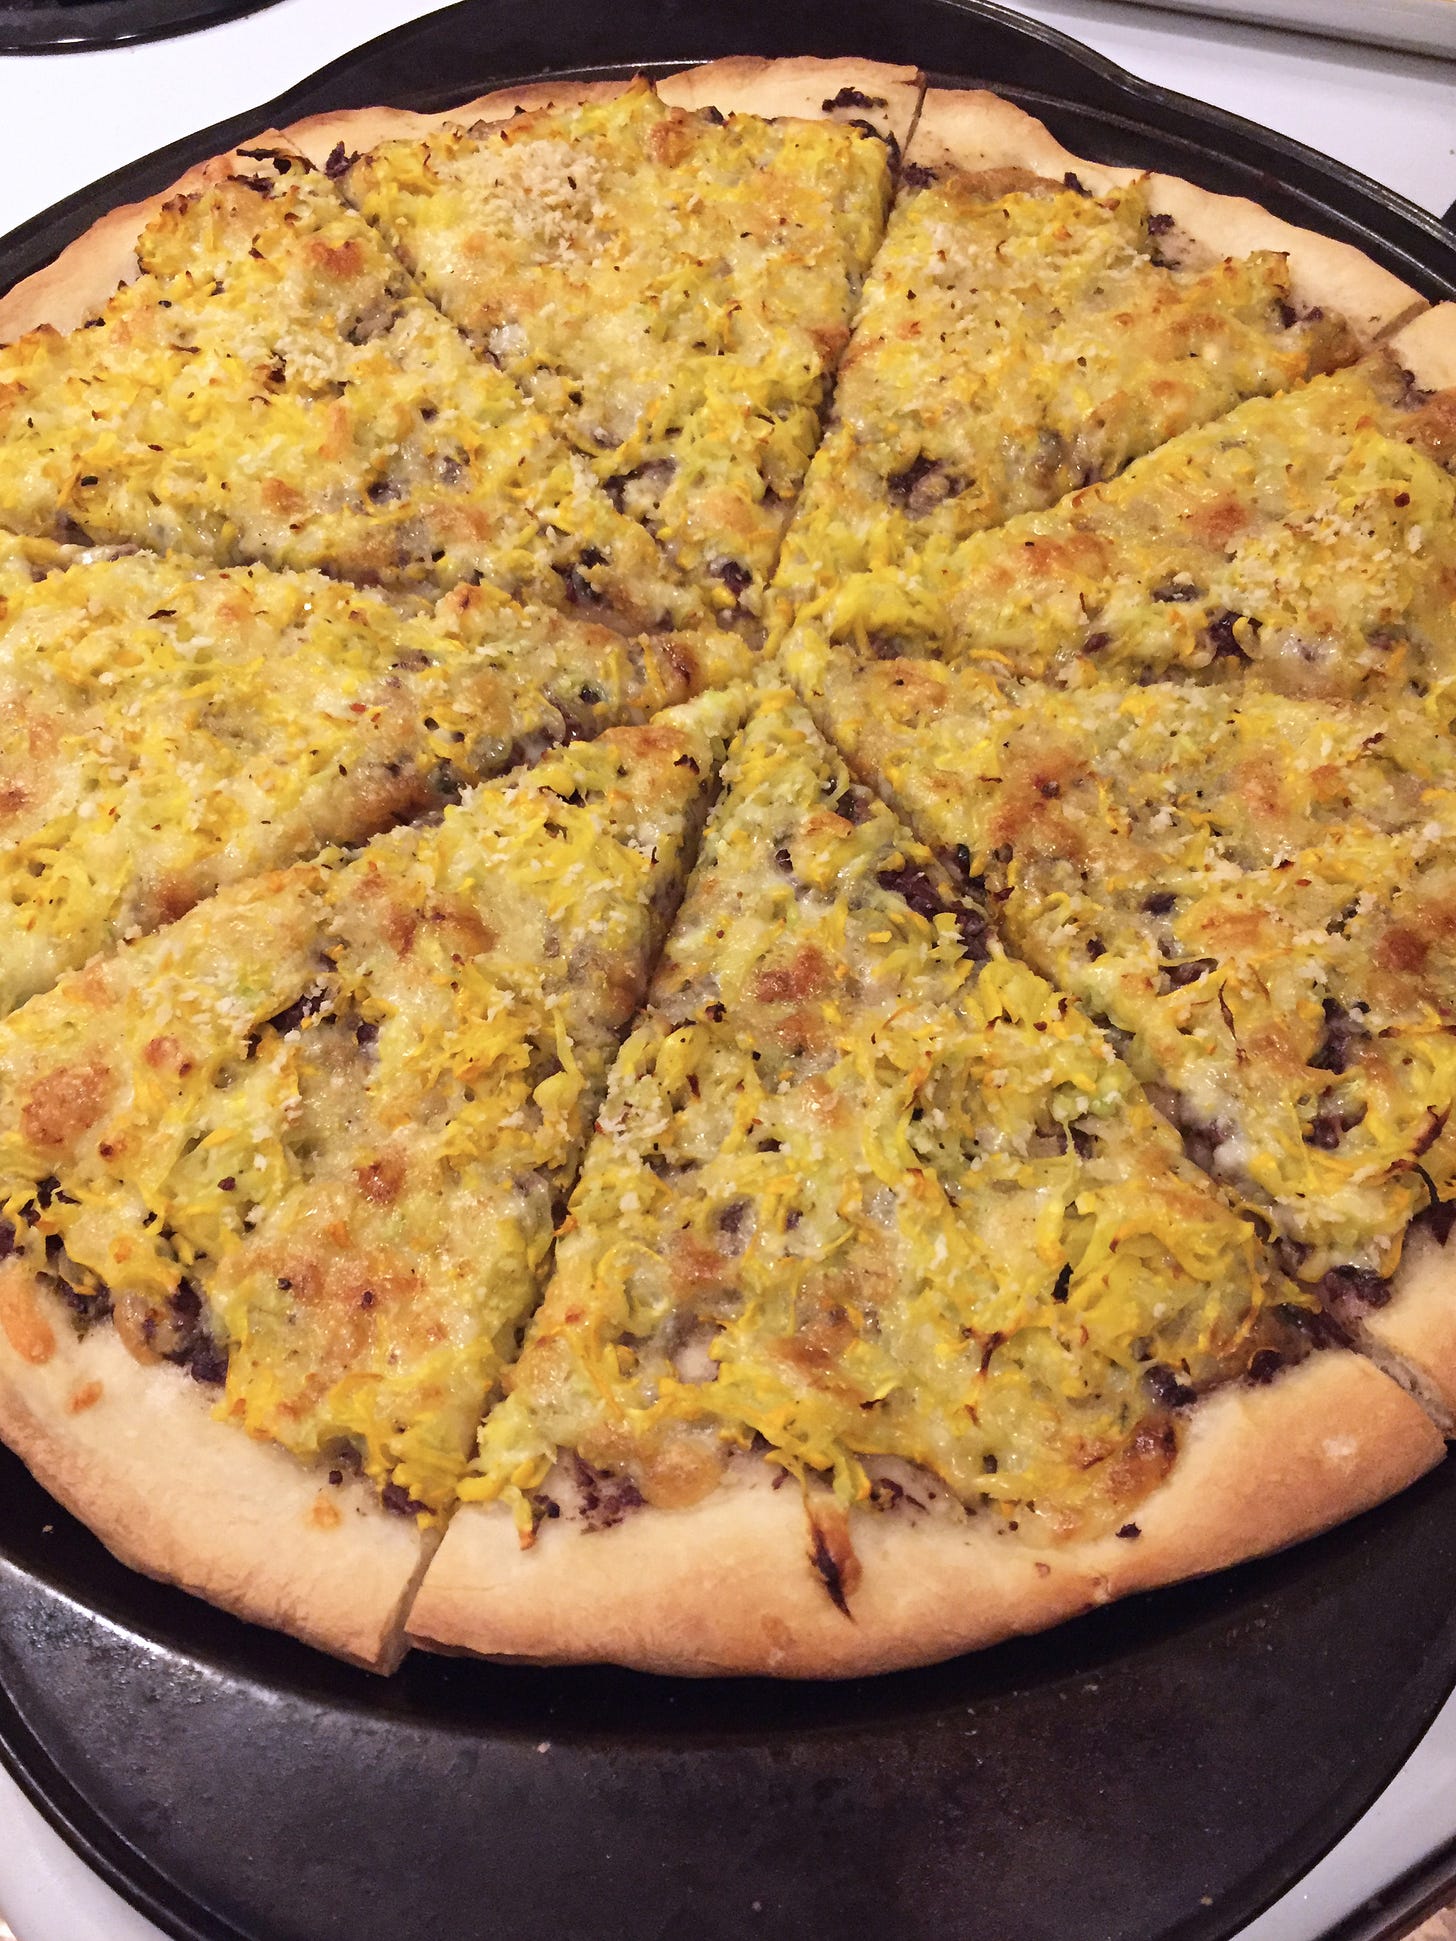 a large pizza sliced into pieces sits in its pan on the stove. Browned cheese and shreds of yellow zucchini cover the top, and bits of dark tapenade are visible in spots underneath, and at the edges.